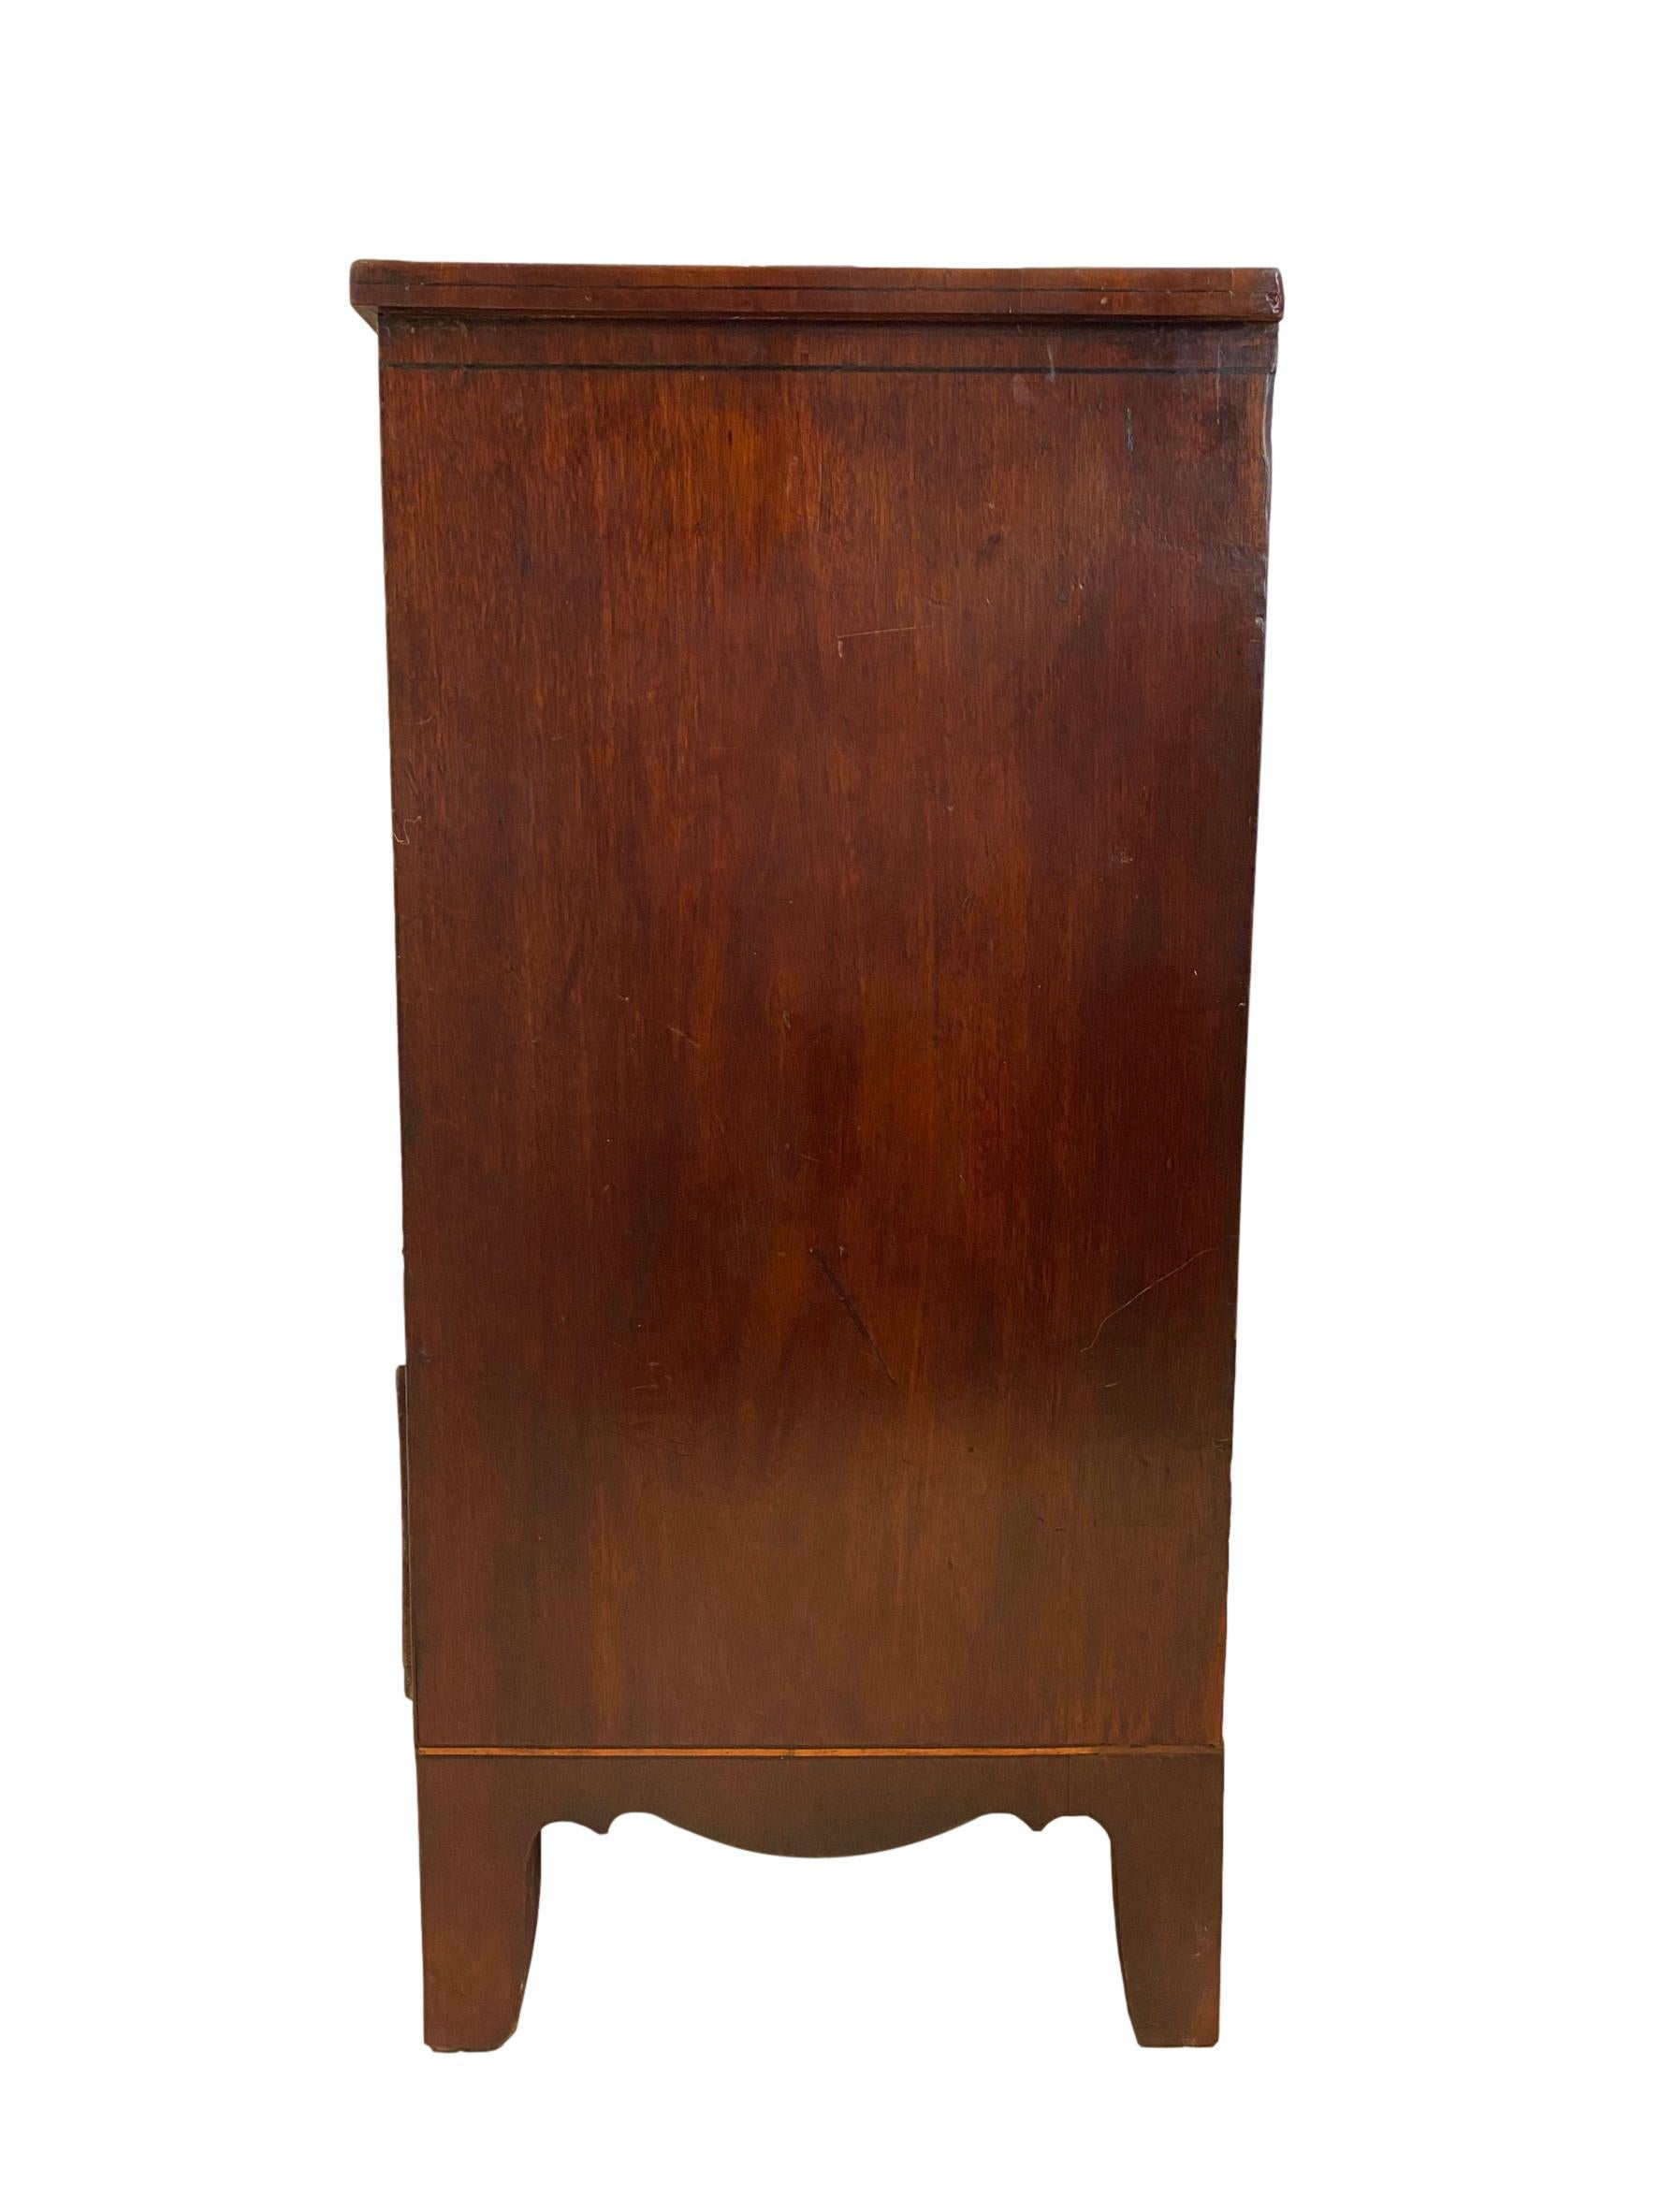 George III (Regency) mahogany chest-of-drawers, three short drawers over three long drawers, with a shaped apron, on saber legs, English, circa 1820.